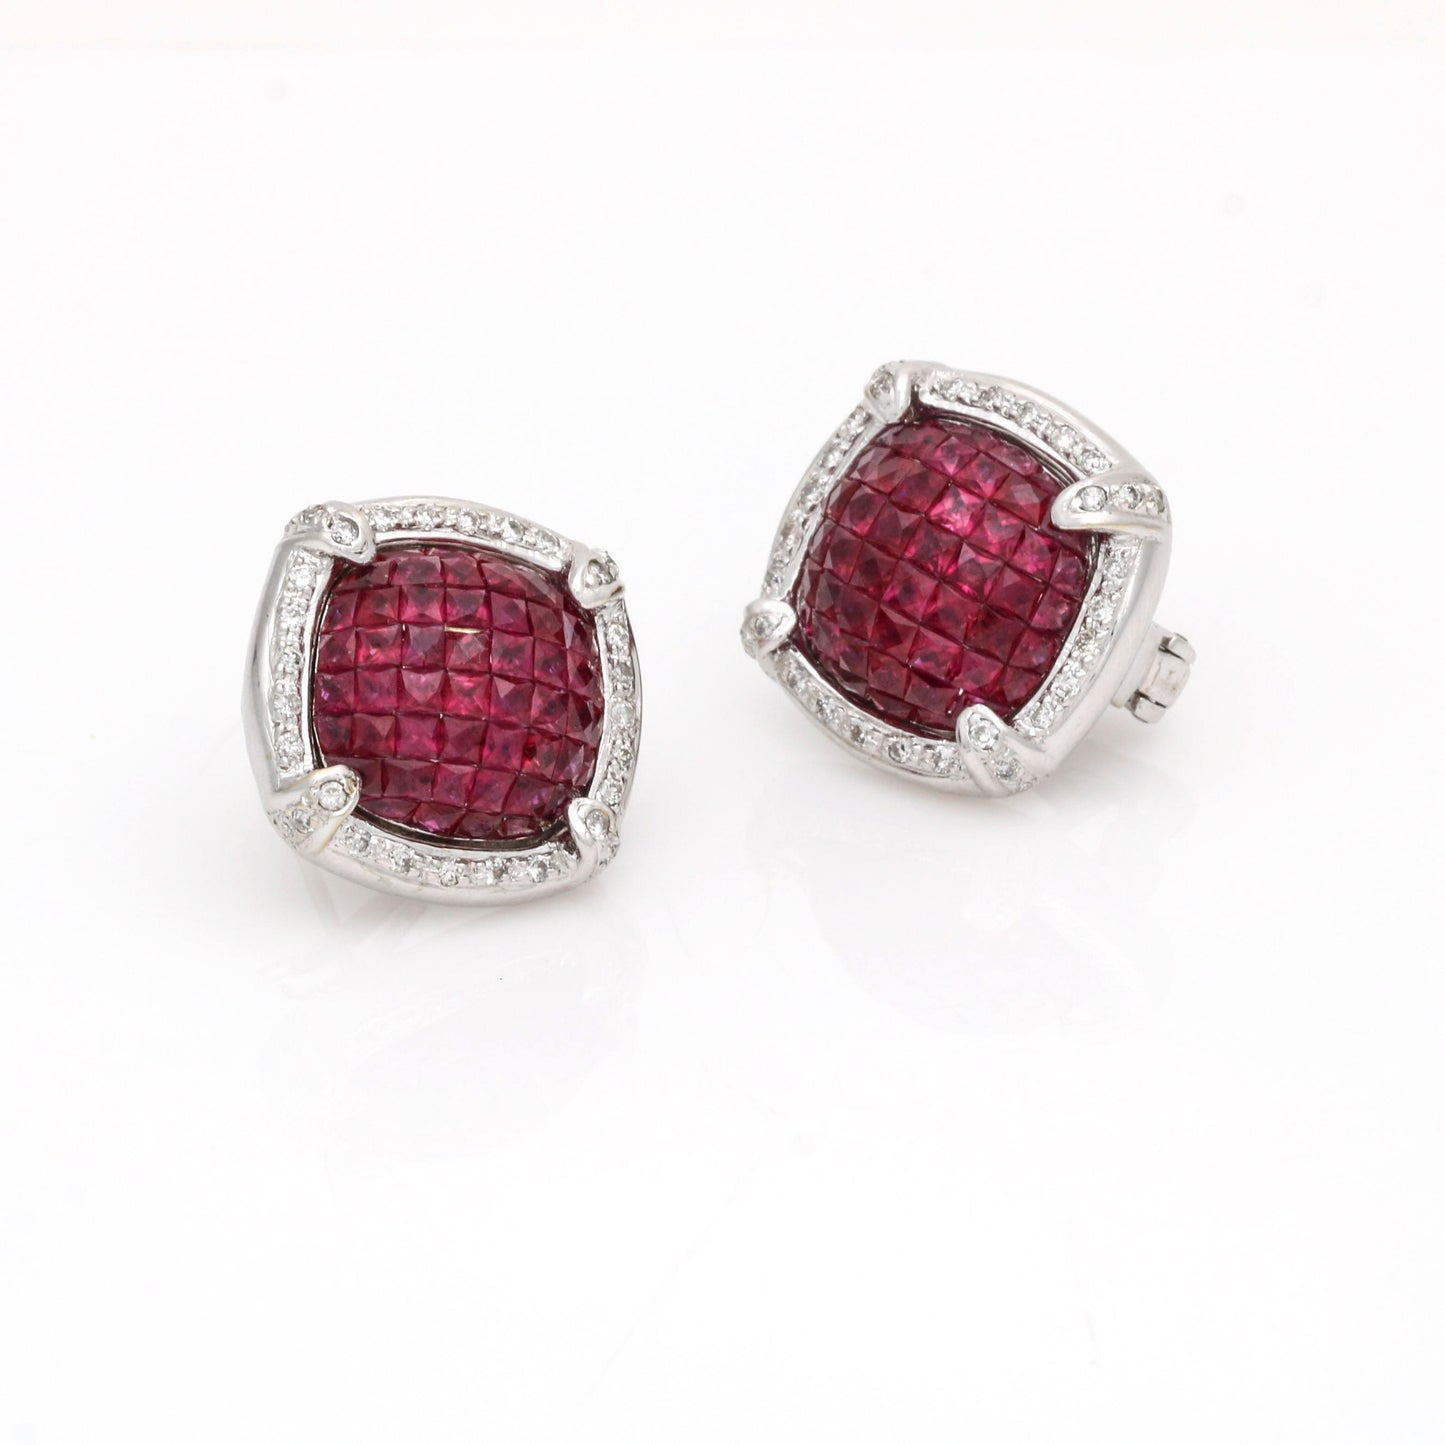 Invisible Set Ruby Diamond Earrings in 18k White Gold 4.75 cttw - 31 Jewels Inc.